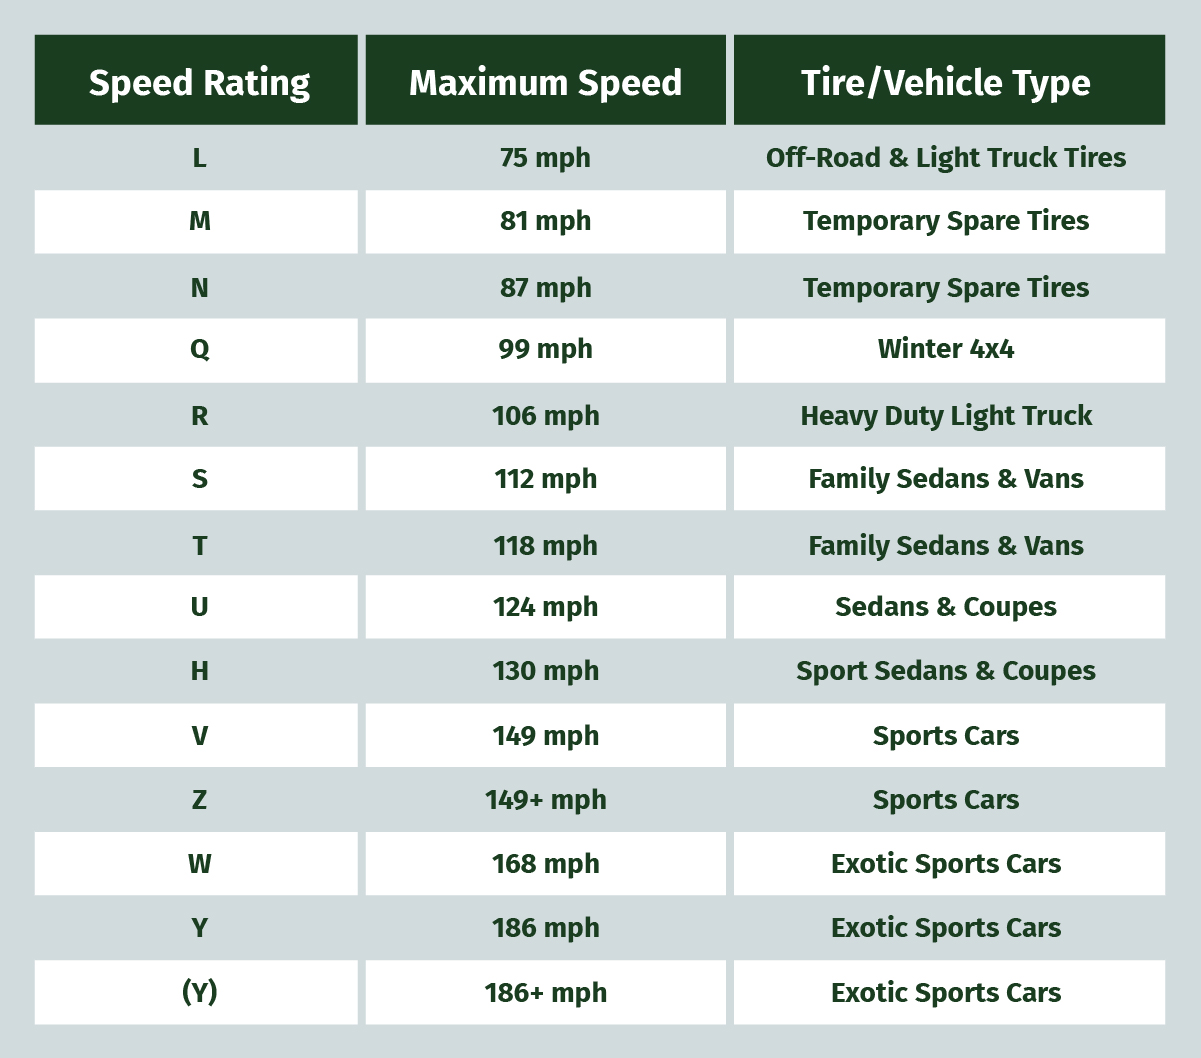 Tire Speed Ratings Explained | Find Your Speed Rating - Blog ...